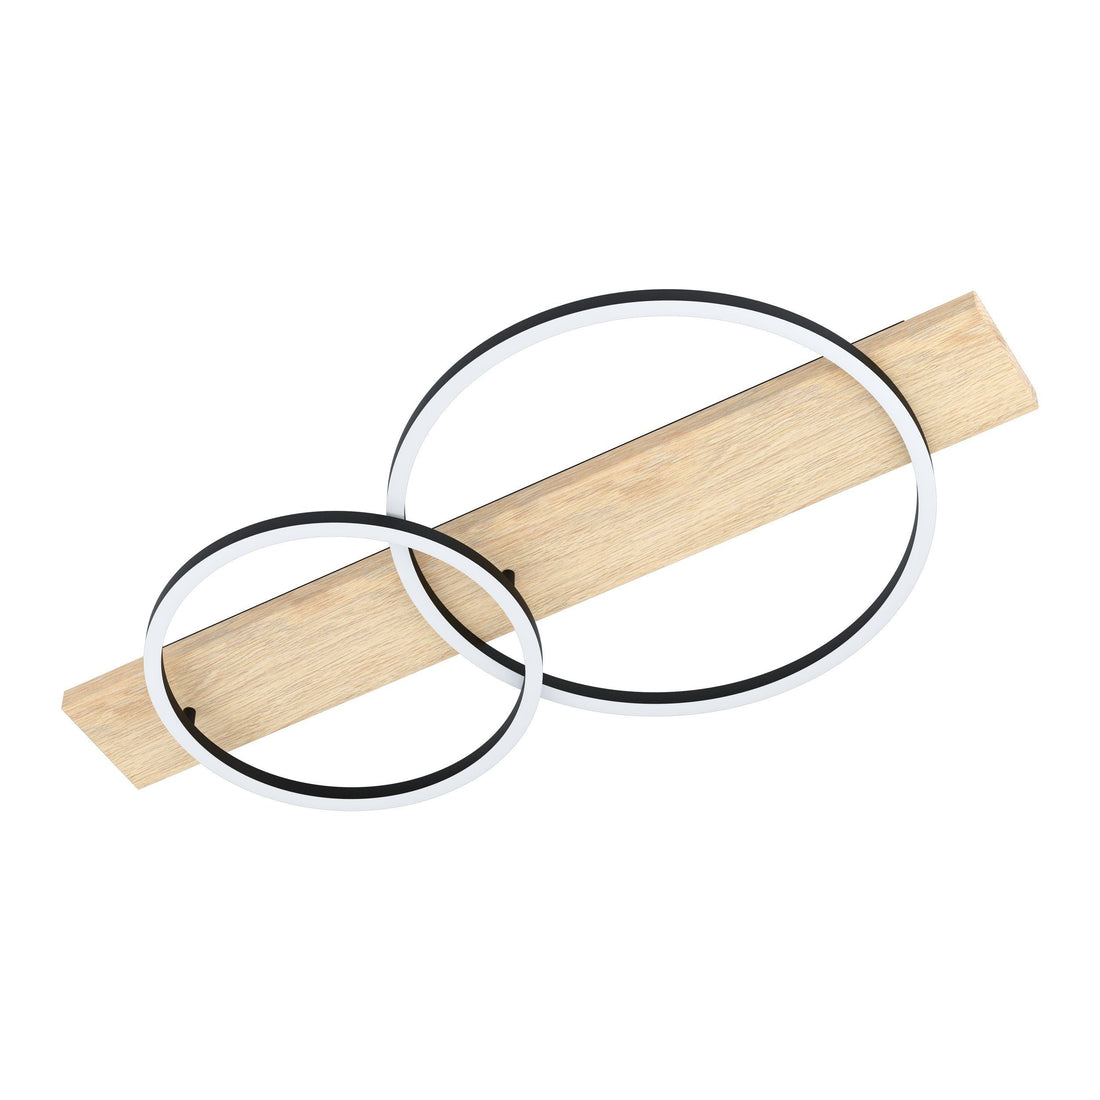 Boyal Natural Timber with Black 2 Ring LED Contemporary Close to Ceiling